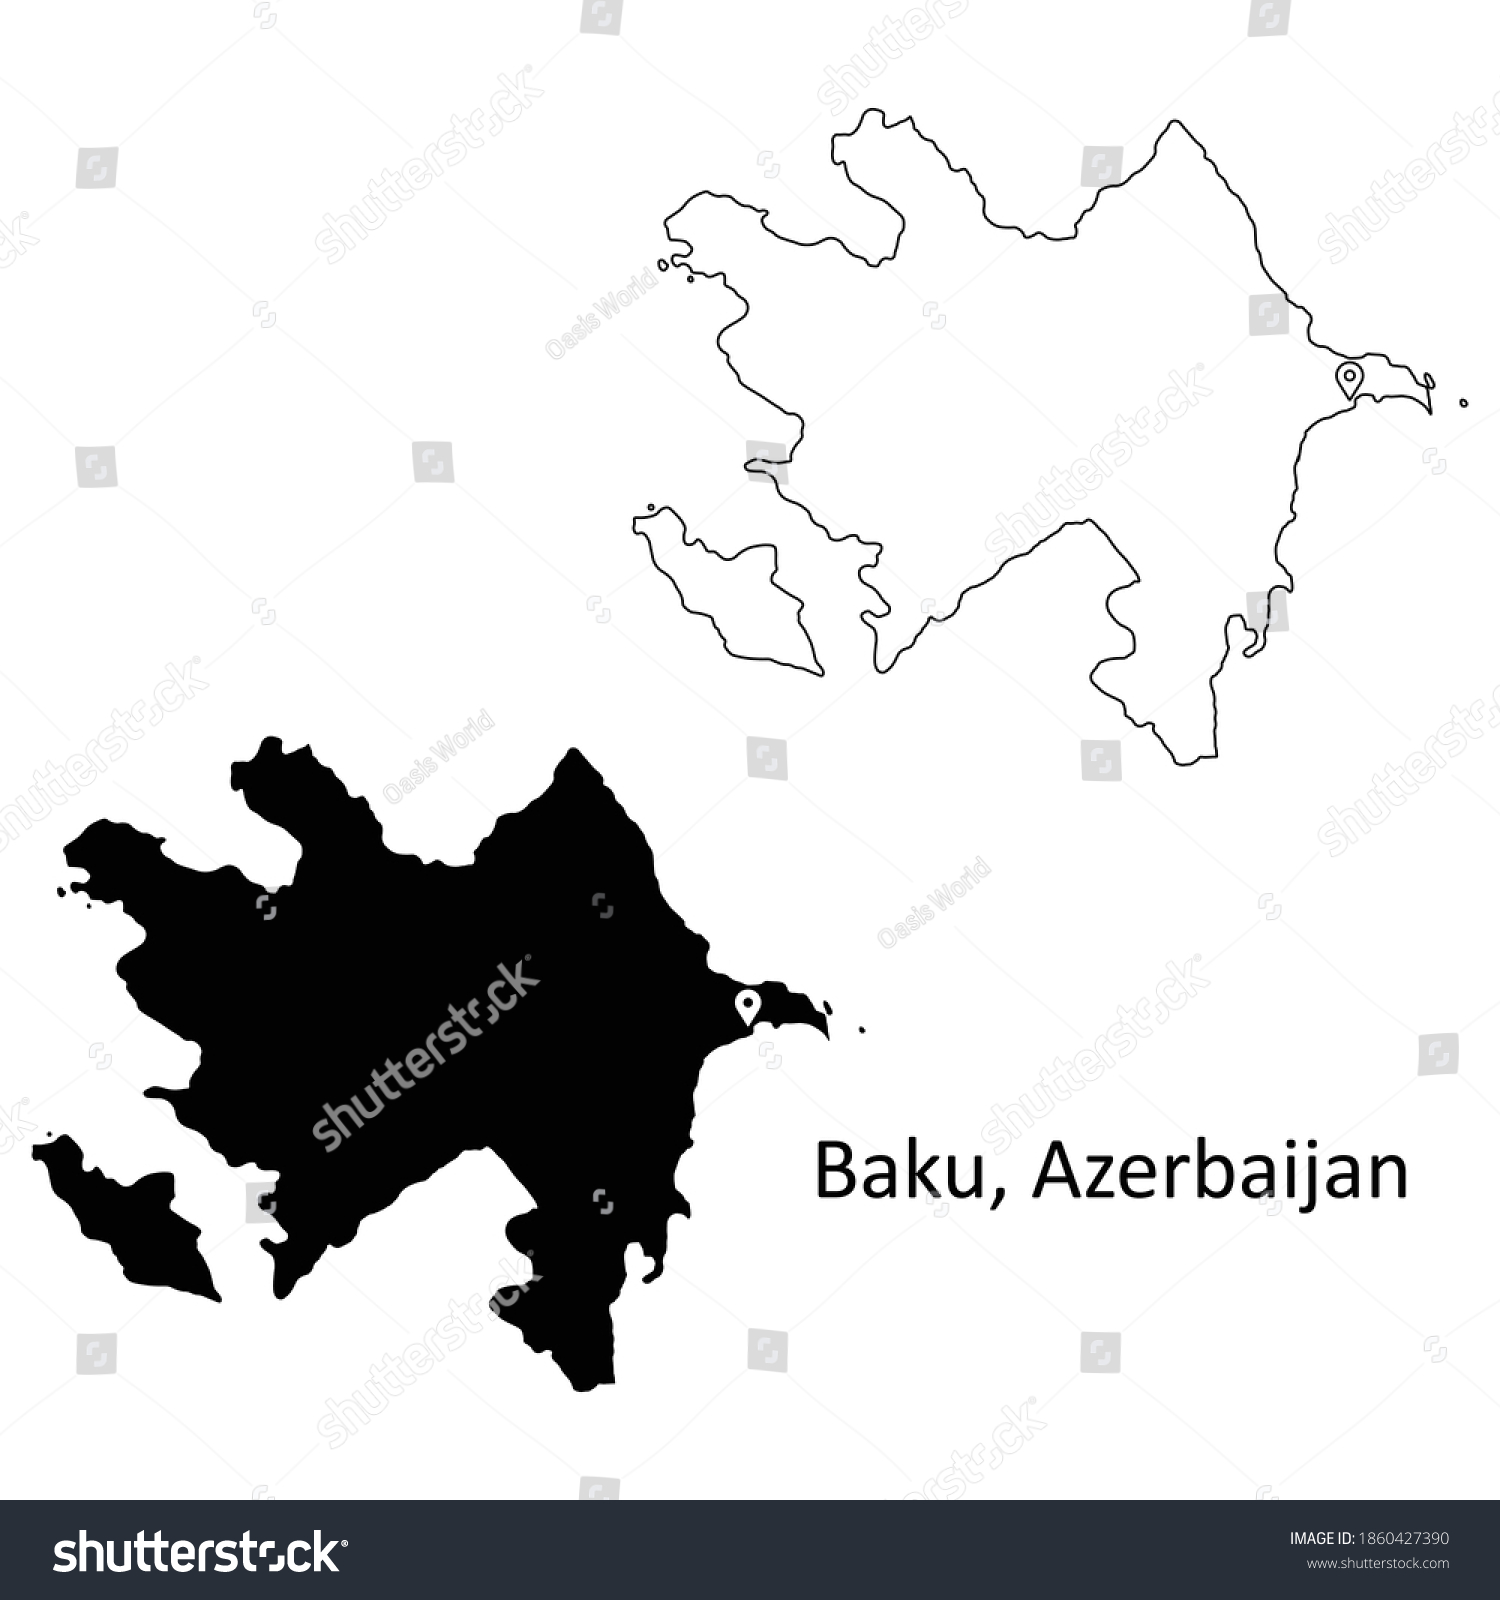 Baku Azerbaijan. Detailed Country Map with Capital City Location Pin. Black silhouette and outline maps isolated on white background. EPS Vector #1860427390